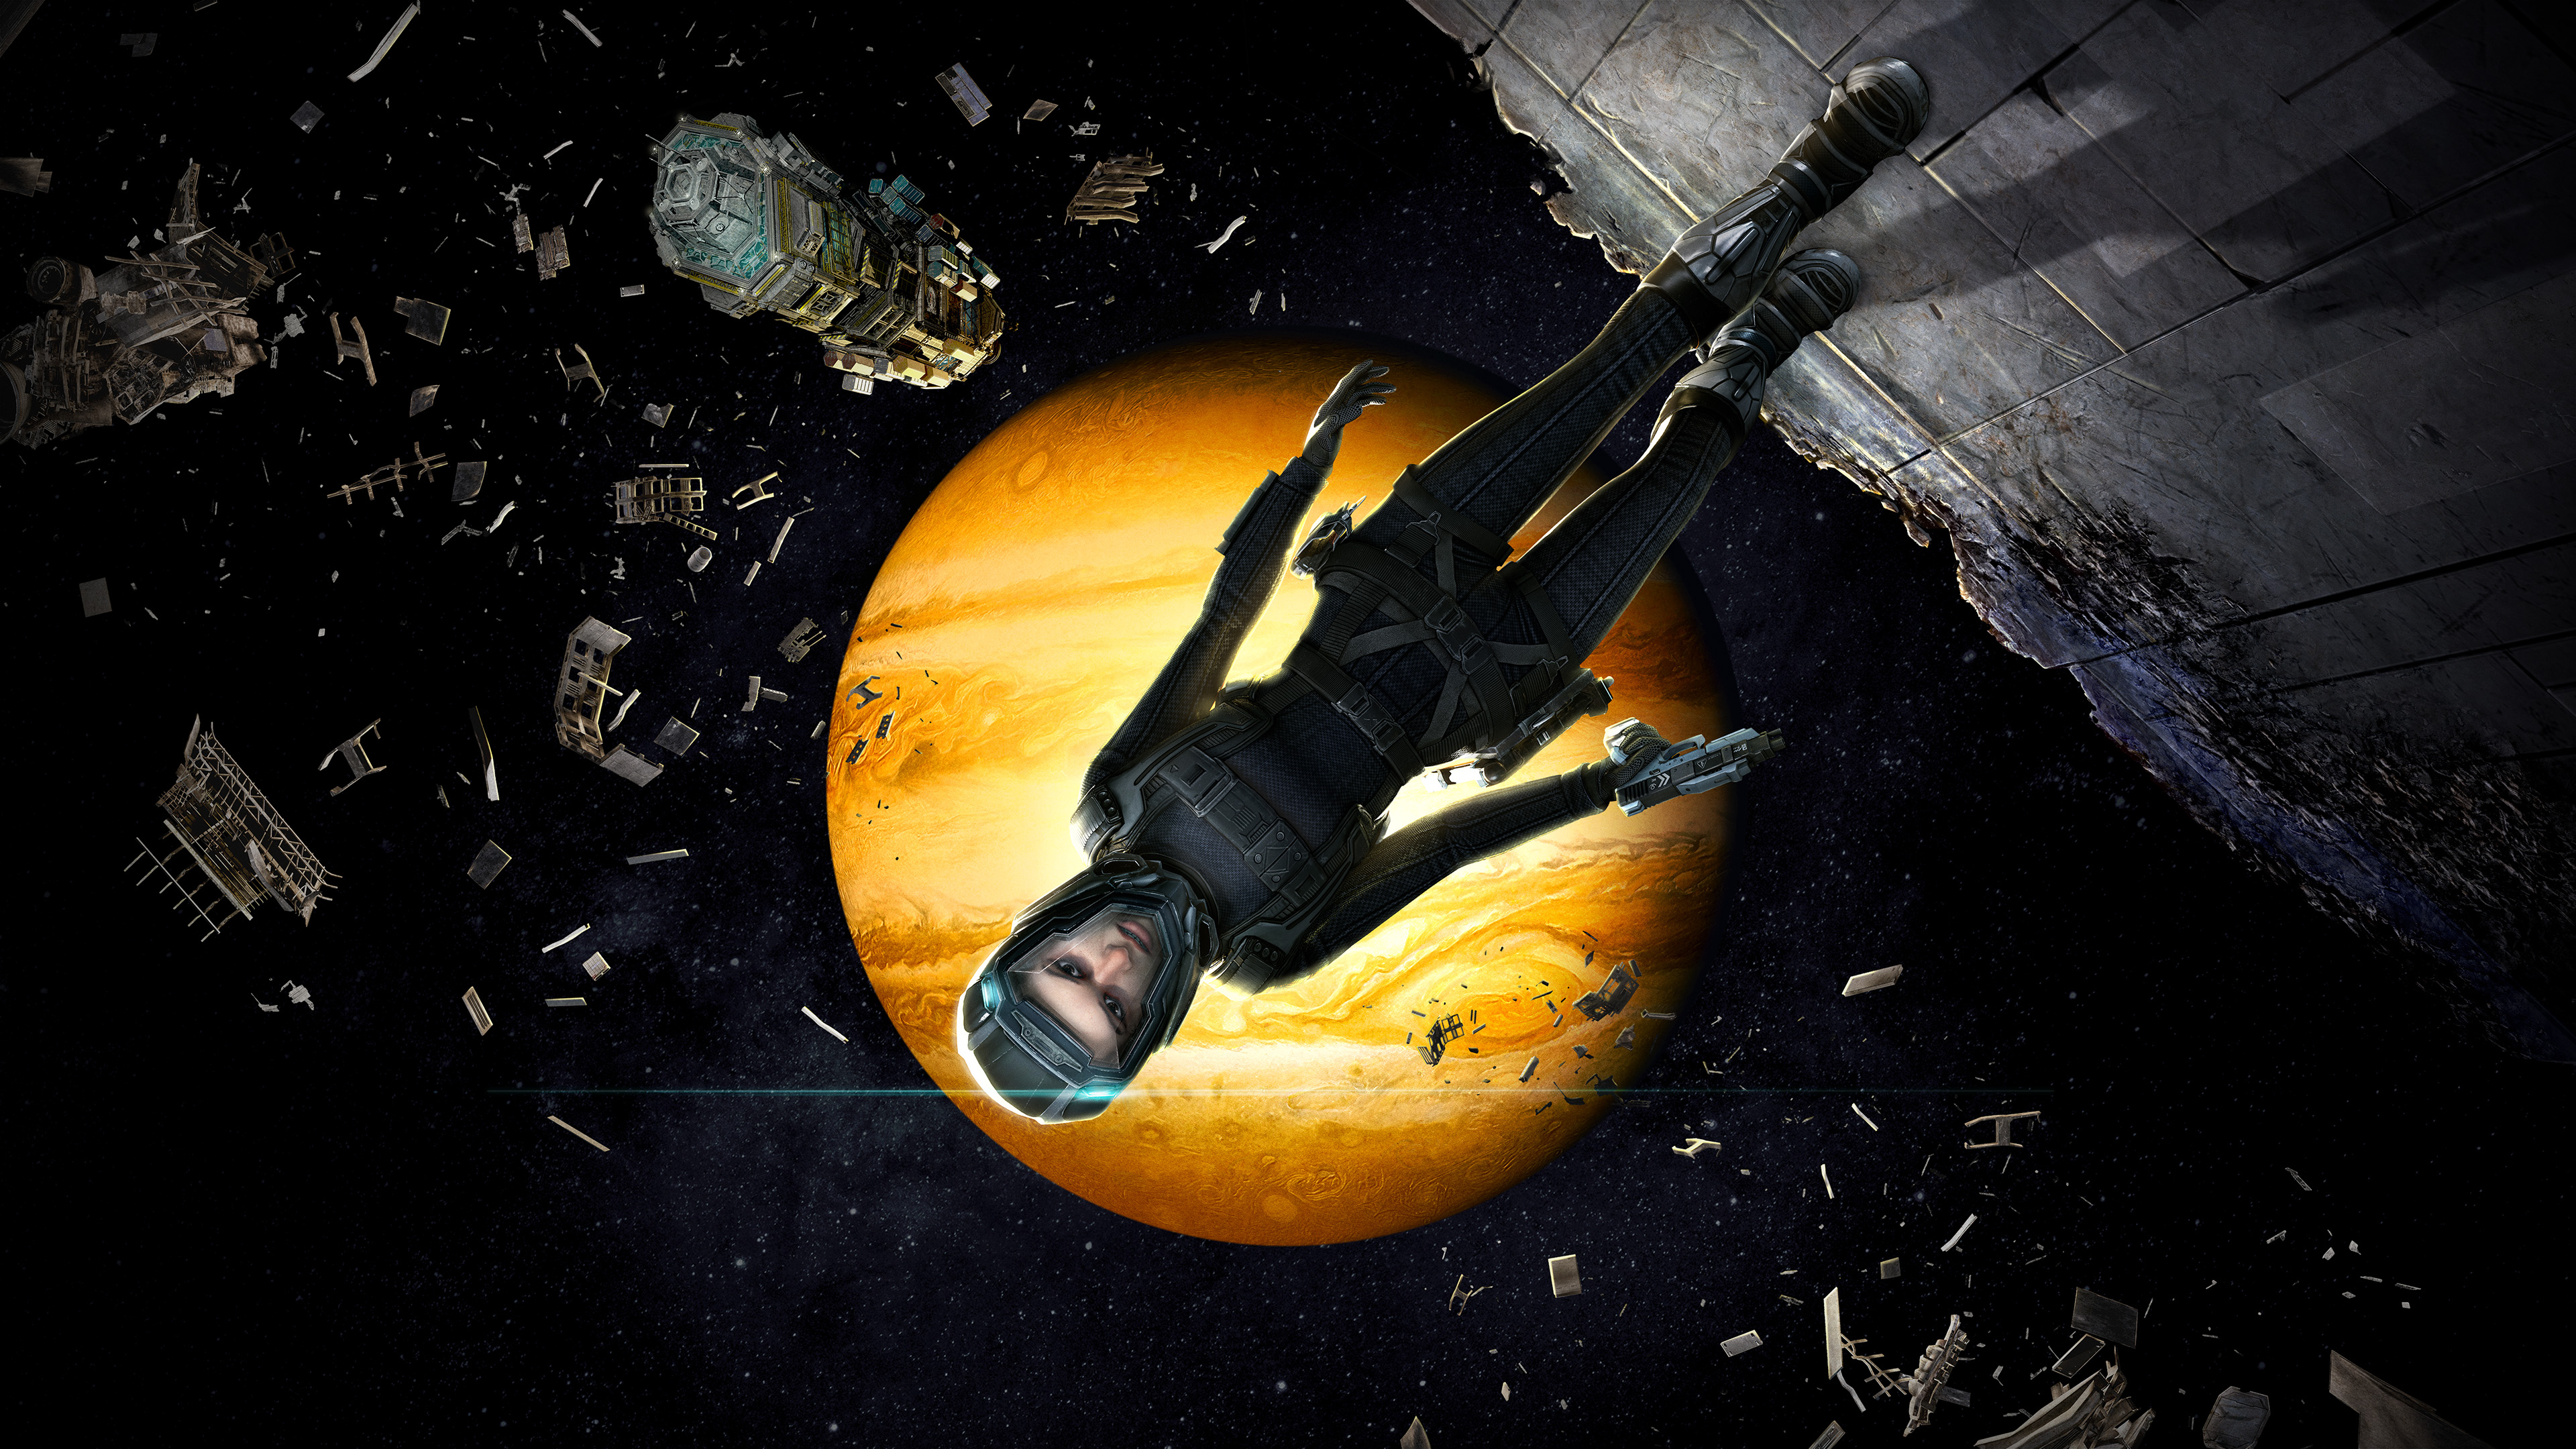 Camina Drummer navigates space in zero-gravity, with a planet framing her from behind, and an asteroid field circling her, in The Expanse: A Telltale Series